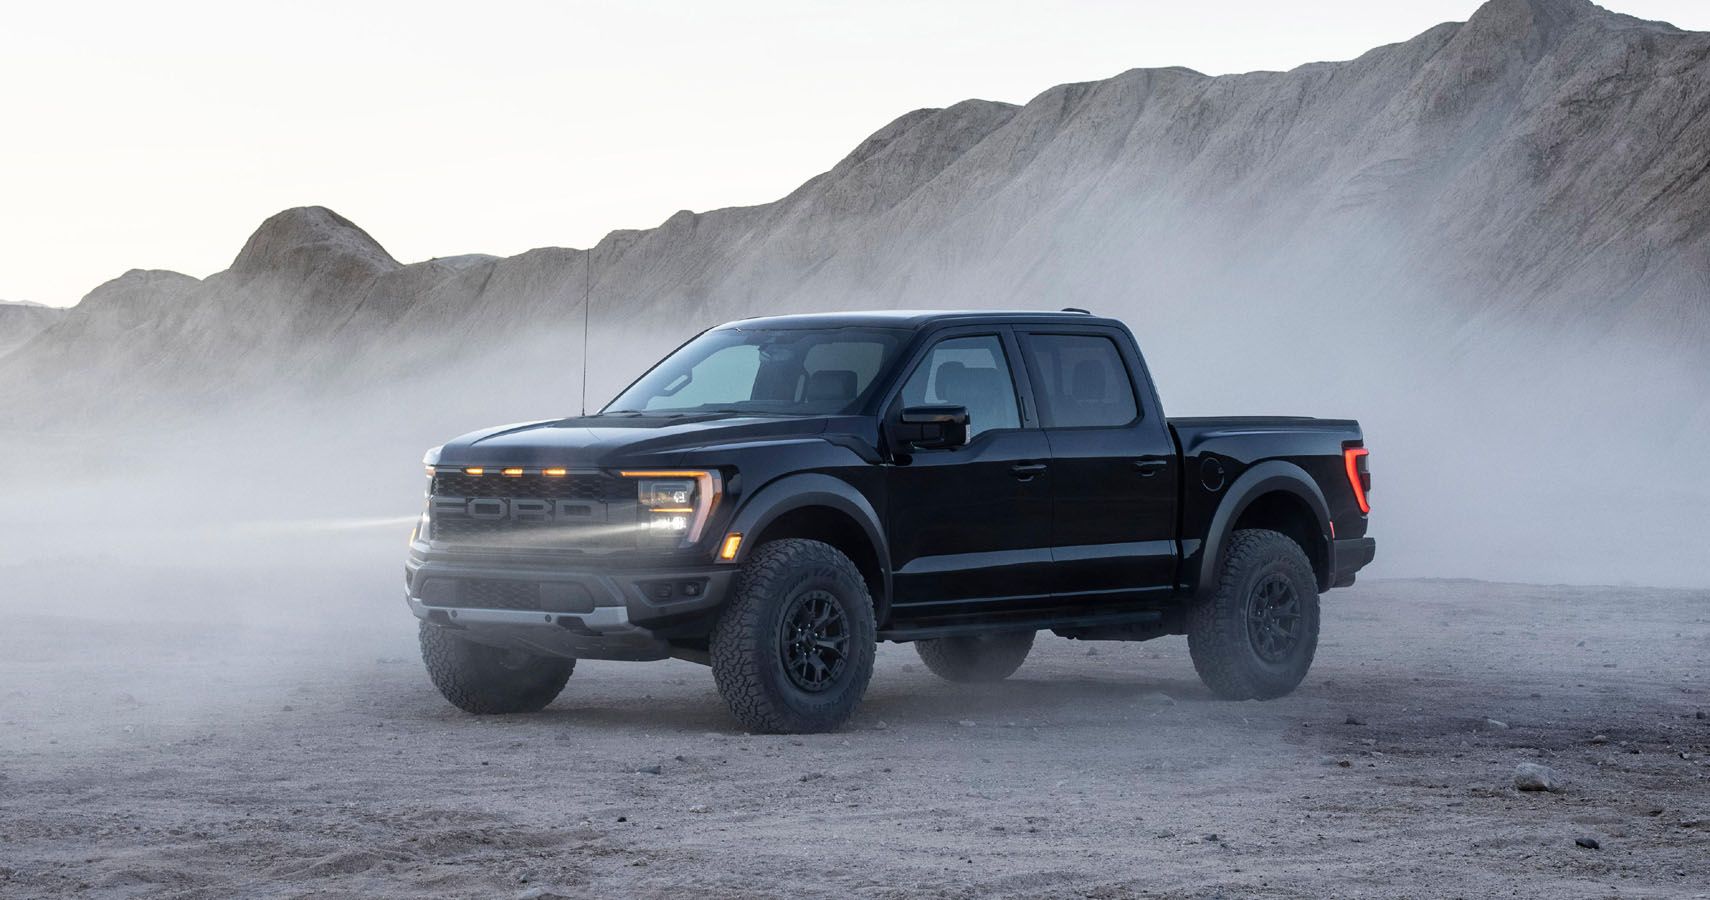 2022 Ford Raptor R Here's What We Know So Far